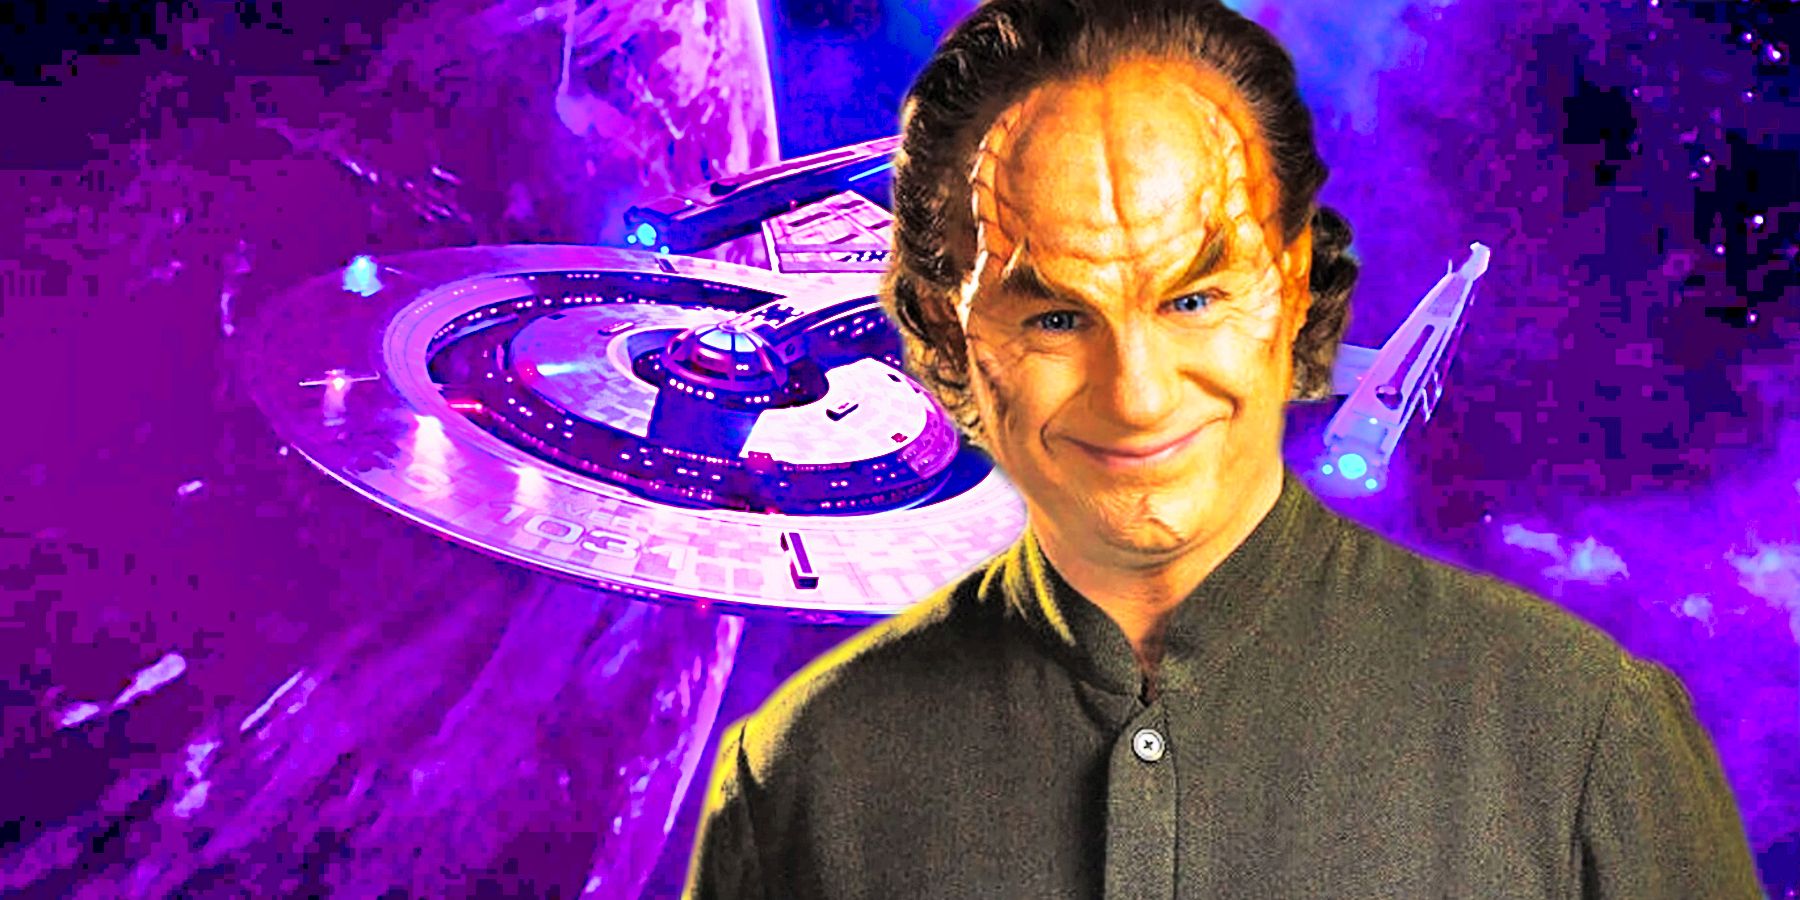 John Billingsley as Dr. Phlox and the USS Discovery from Star Trek